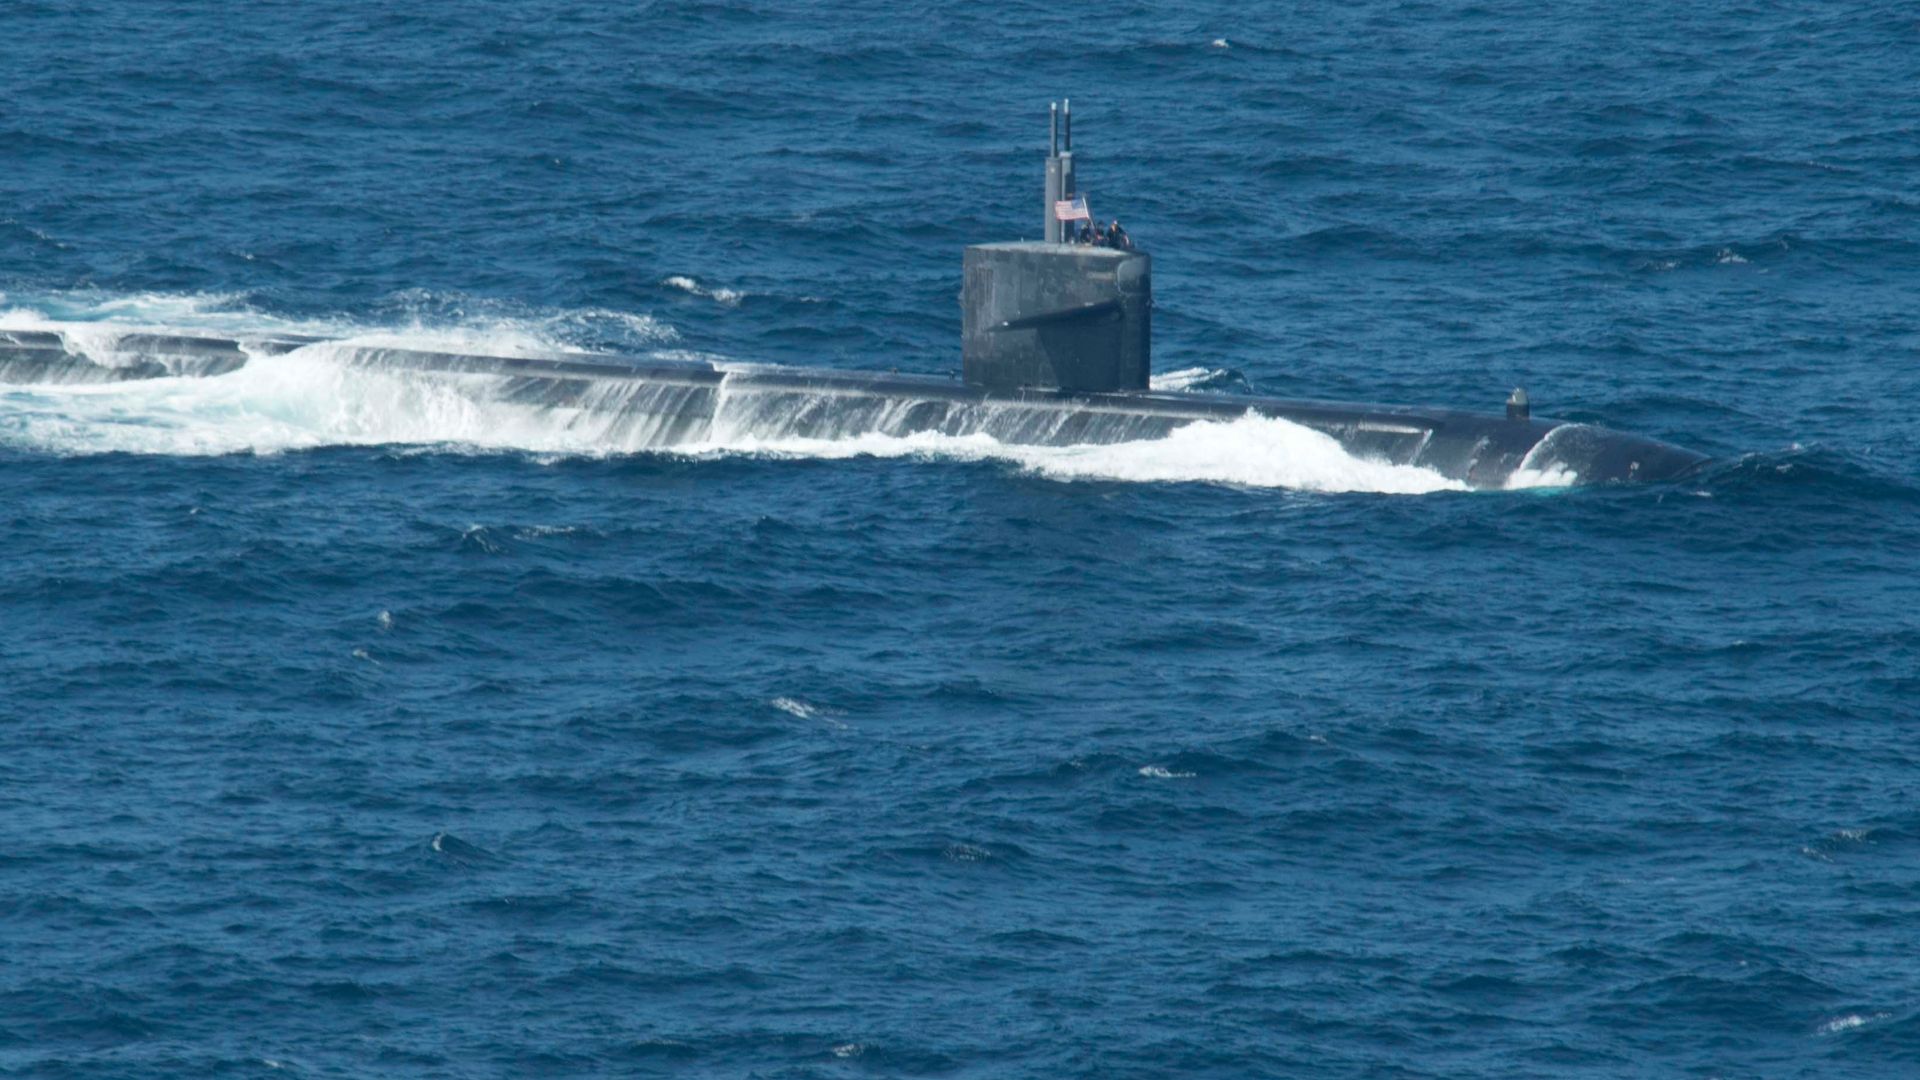 Submarines rely on stealth to keep crews alive and in the fight, but researchers in China may have just blown that ability out of the water.